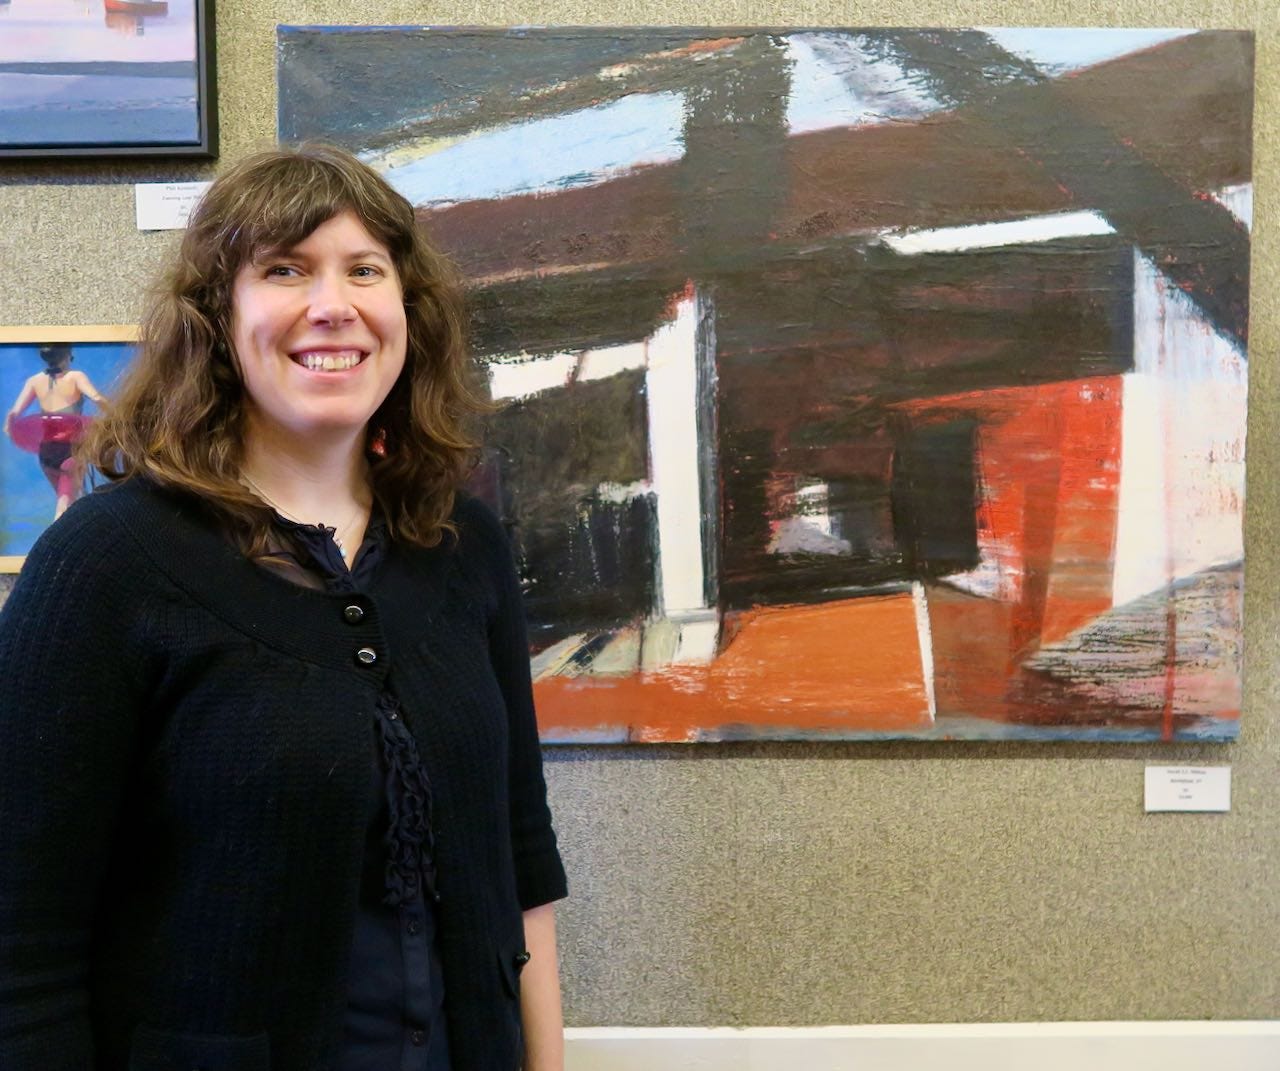 A person smiling in front of a painting

Description automatically generated with low confidence